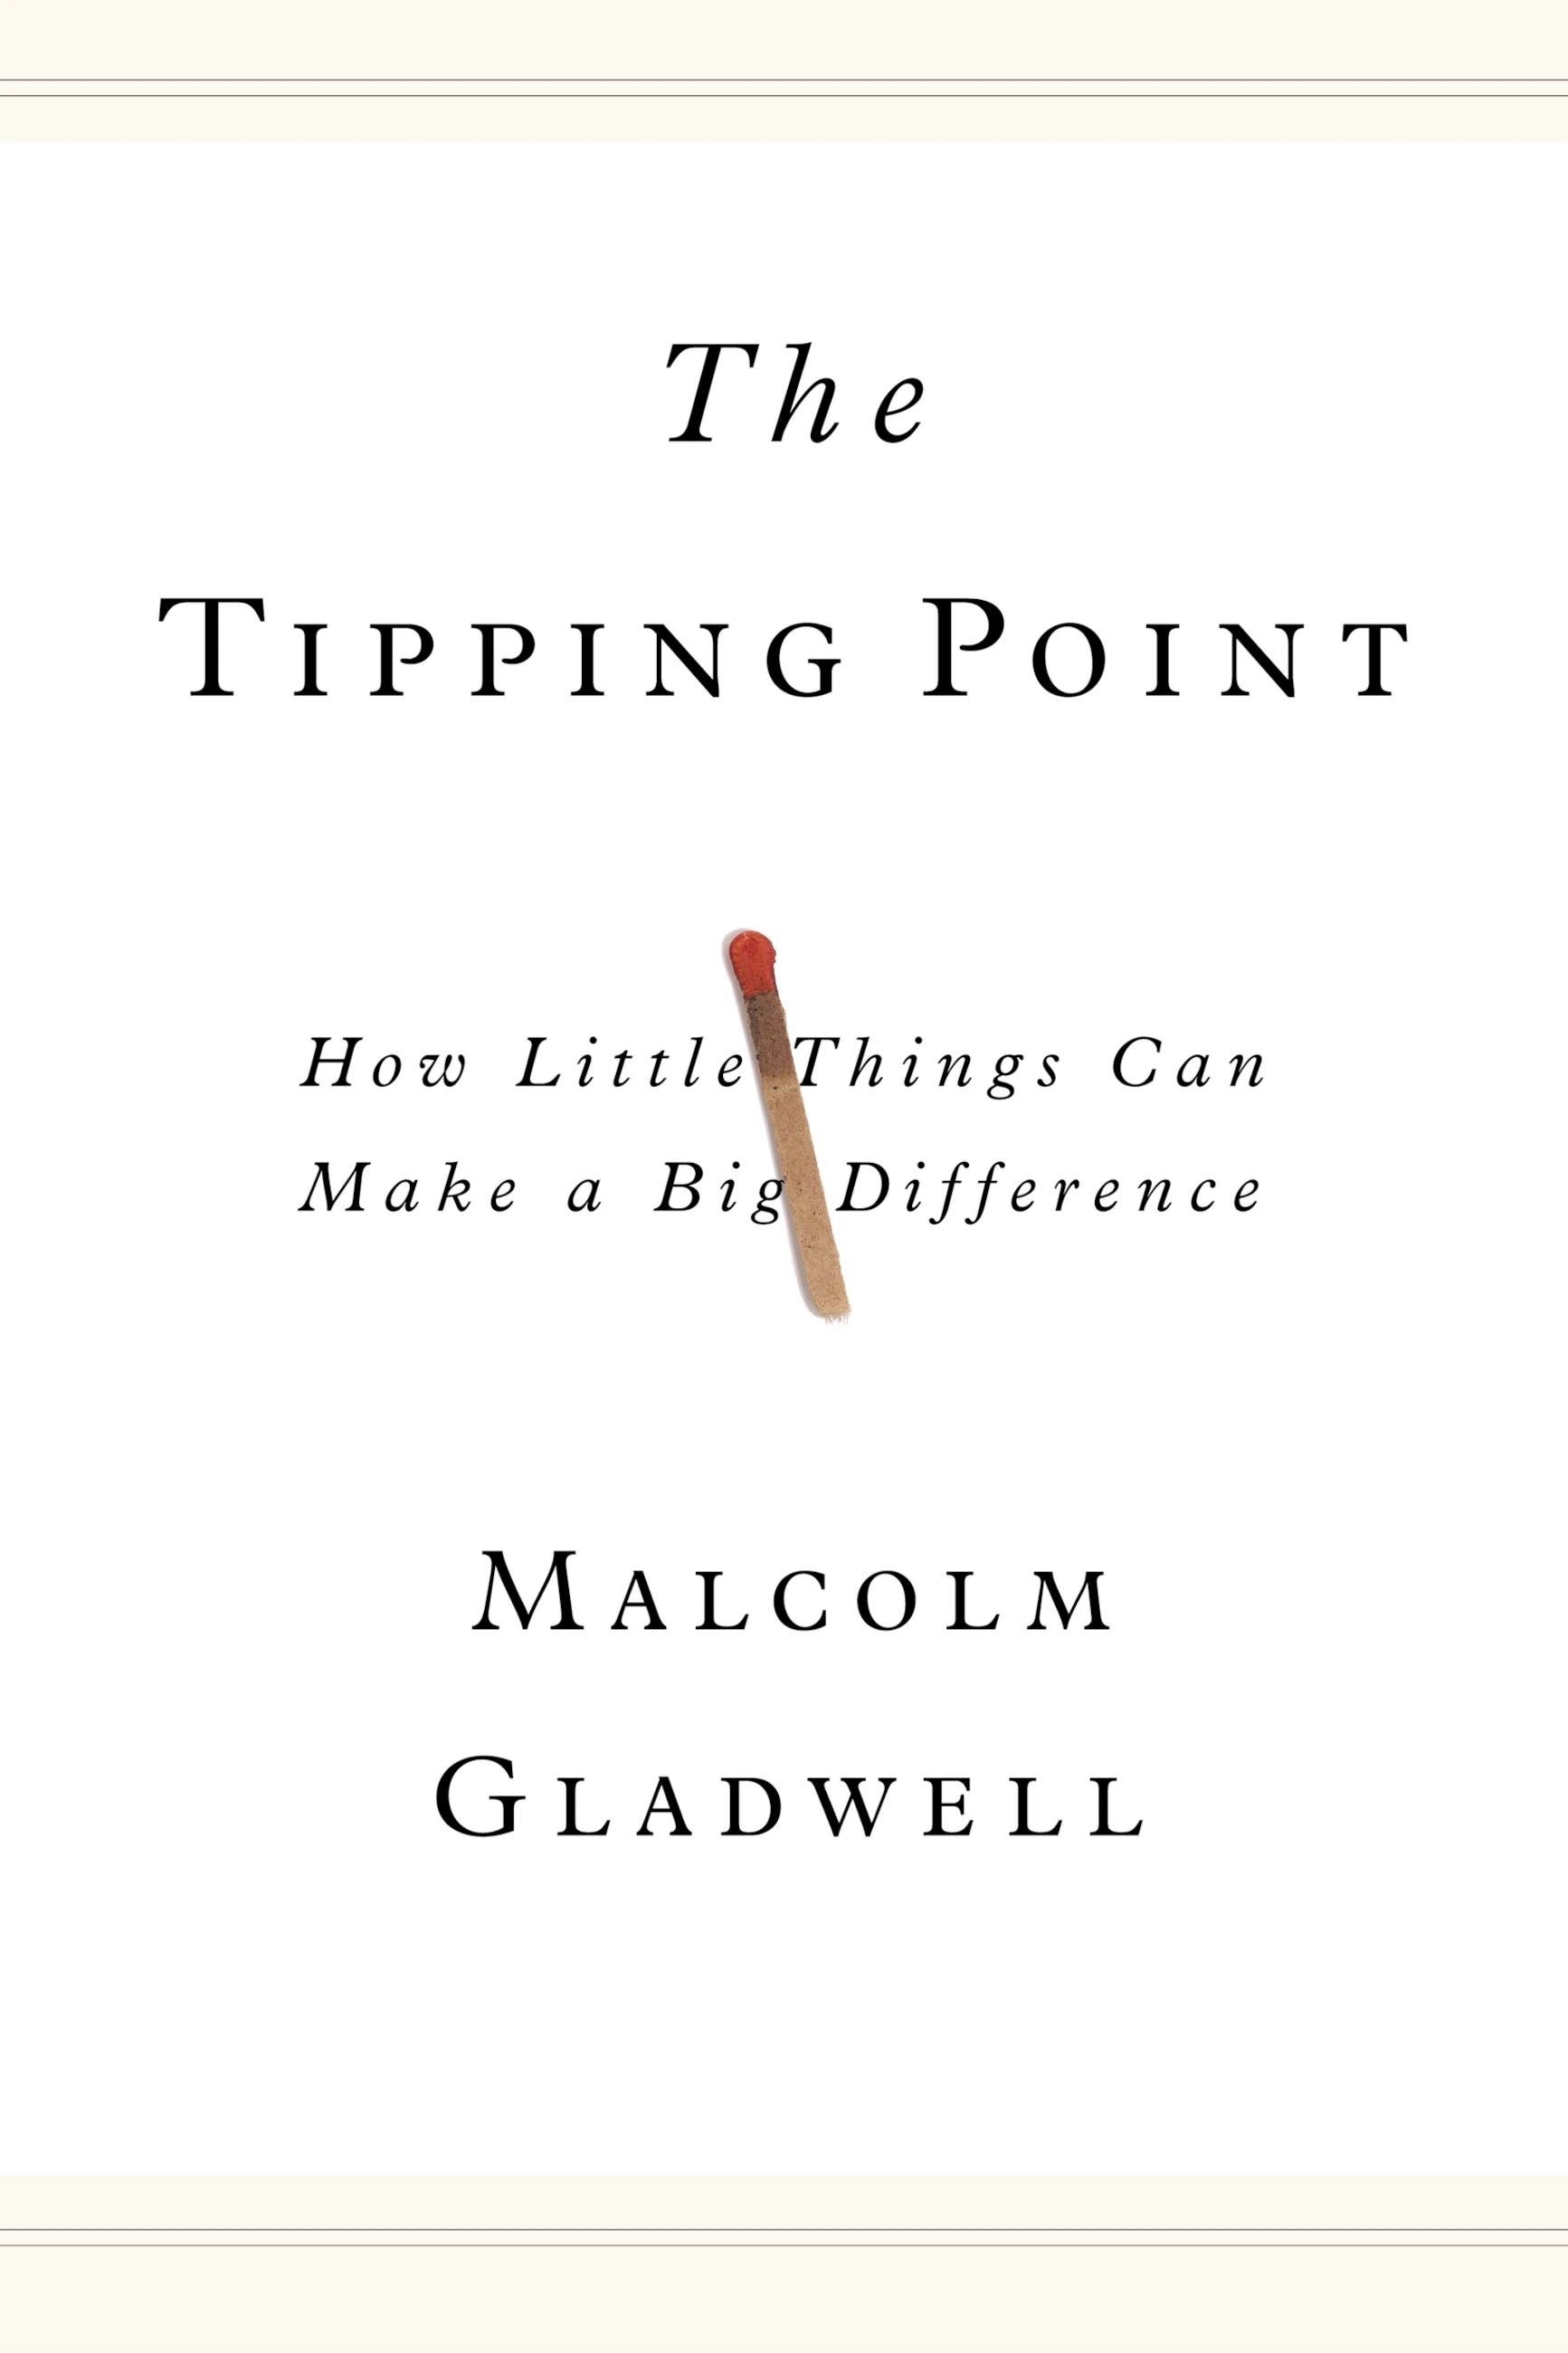 The Tipping Point — Book Summary